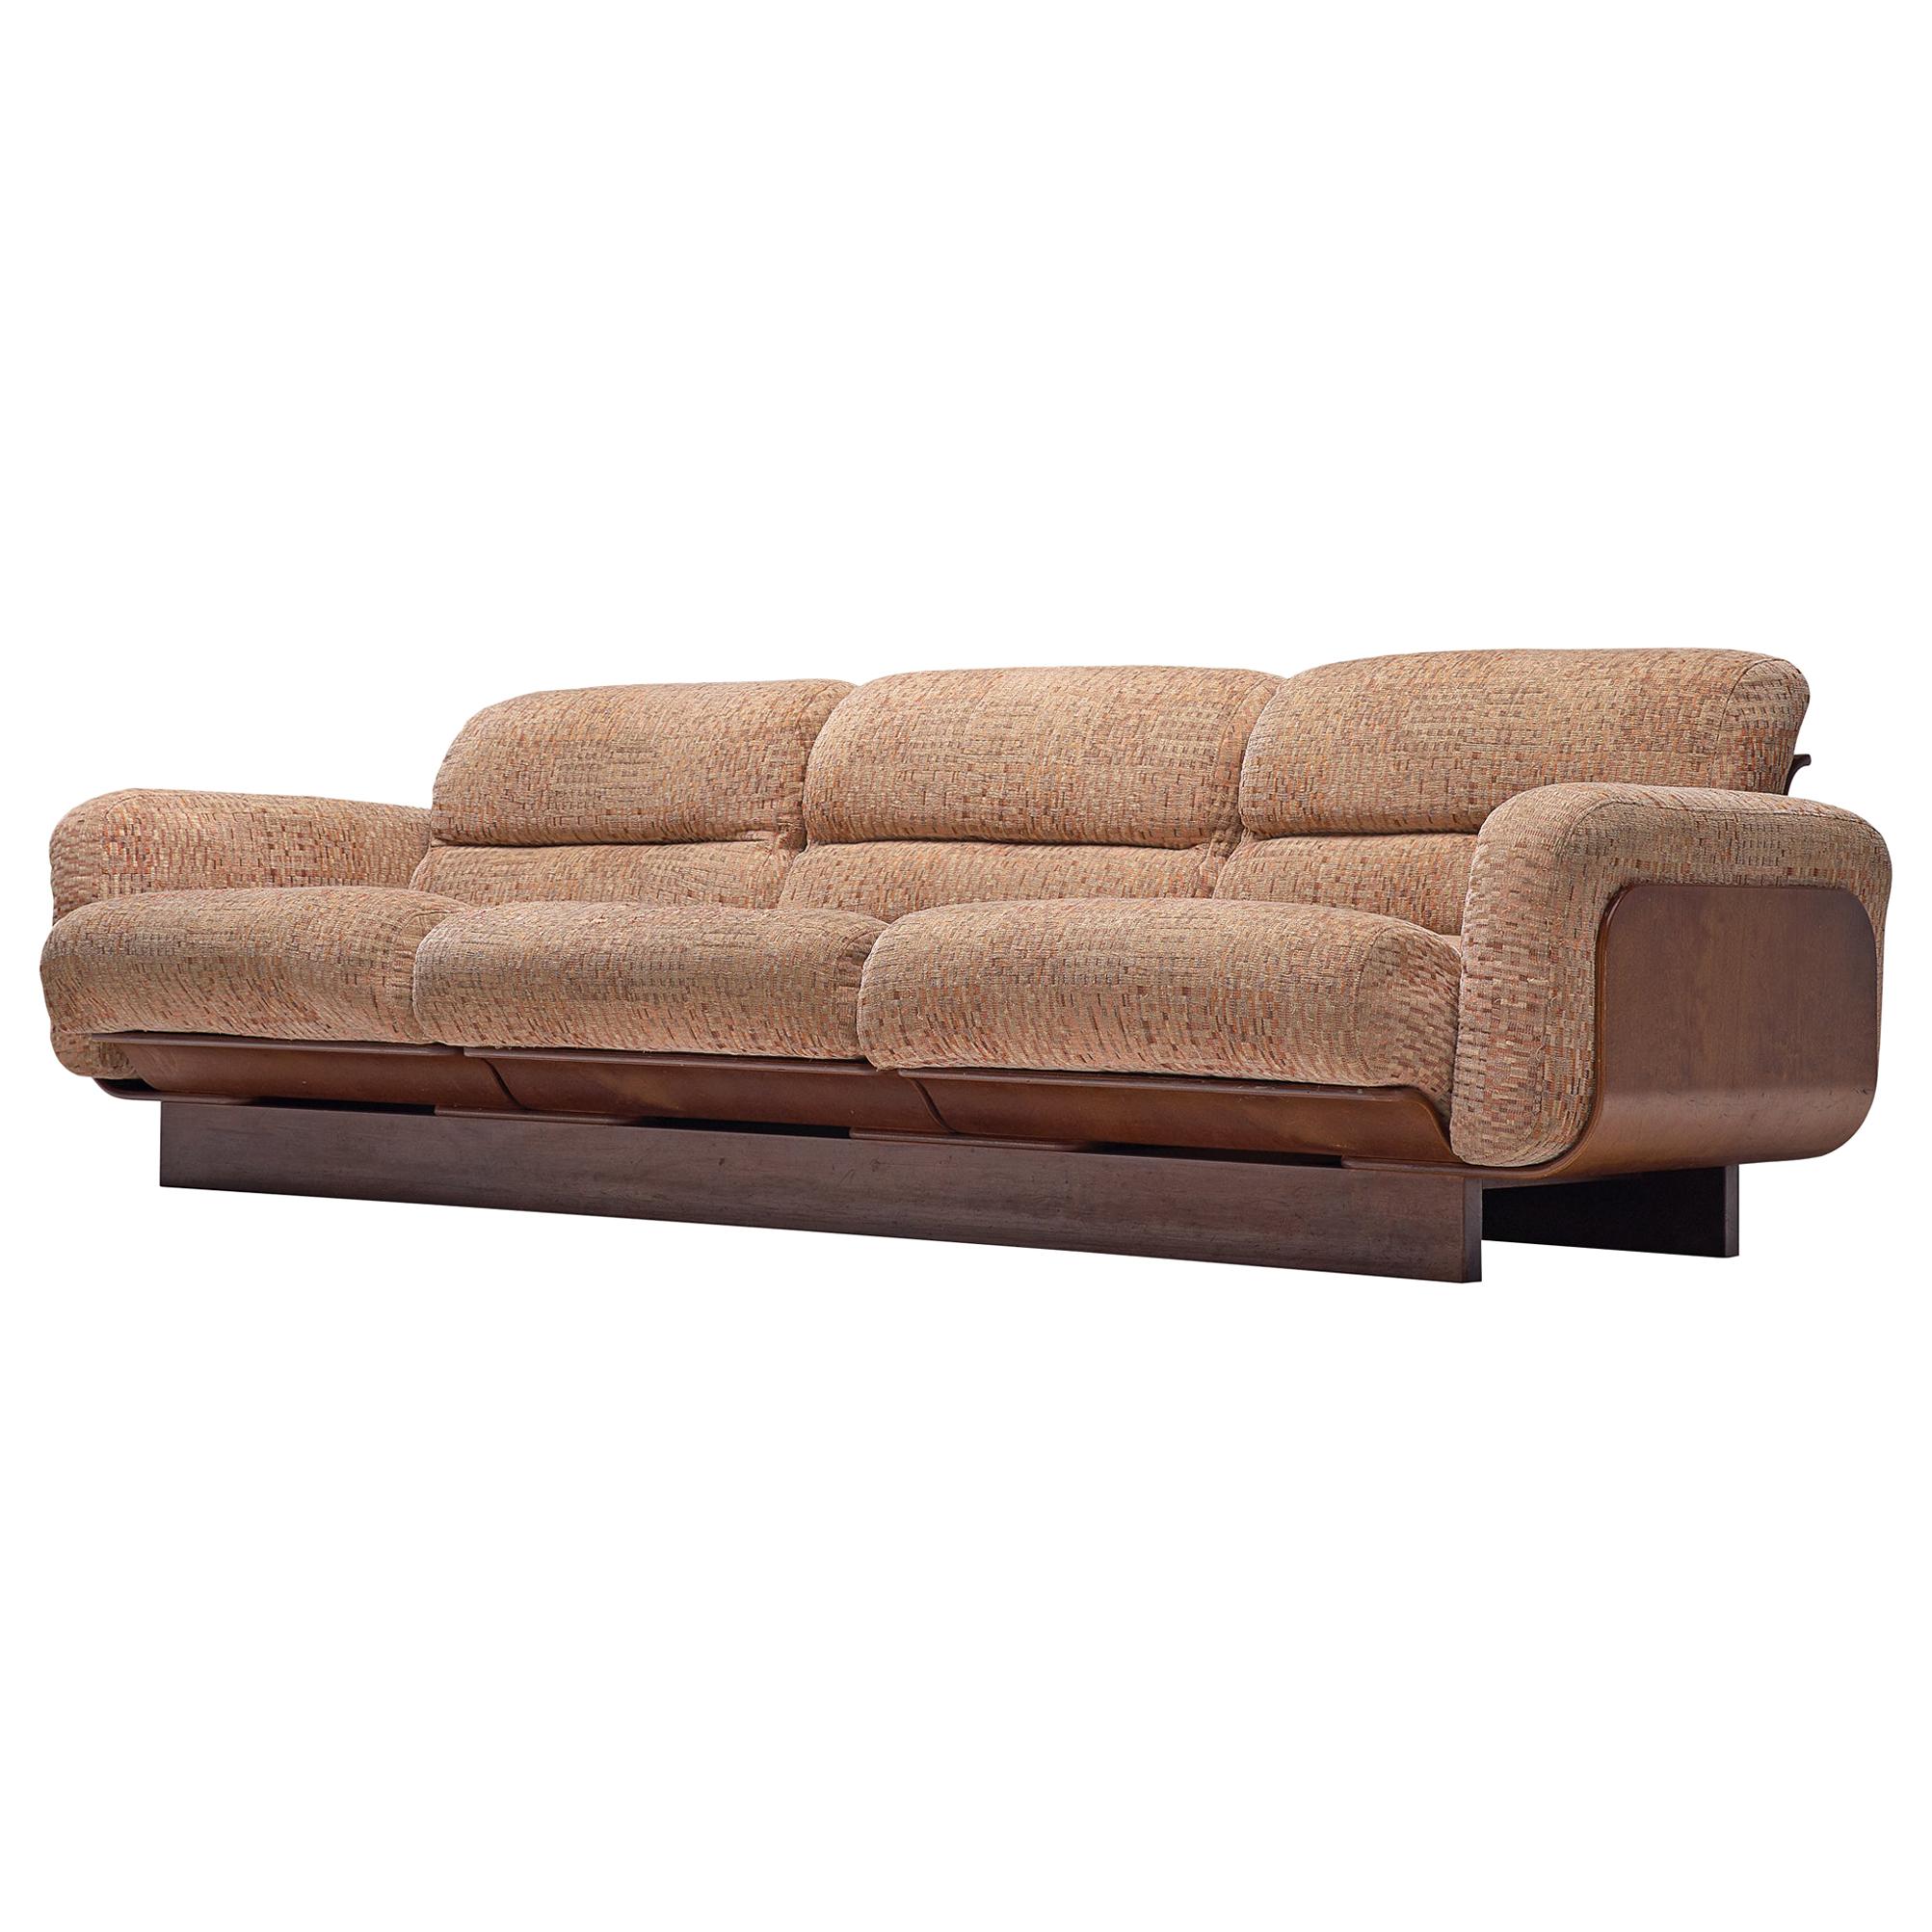 Finnish Sofa in Teak and Patterned Upholstery